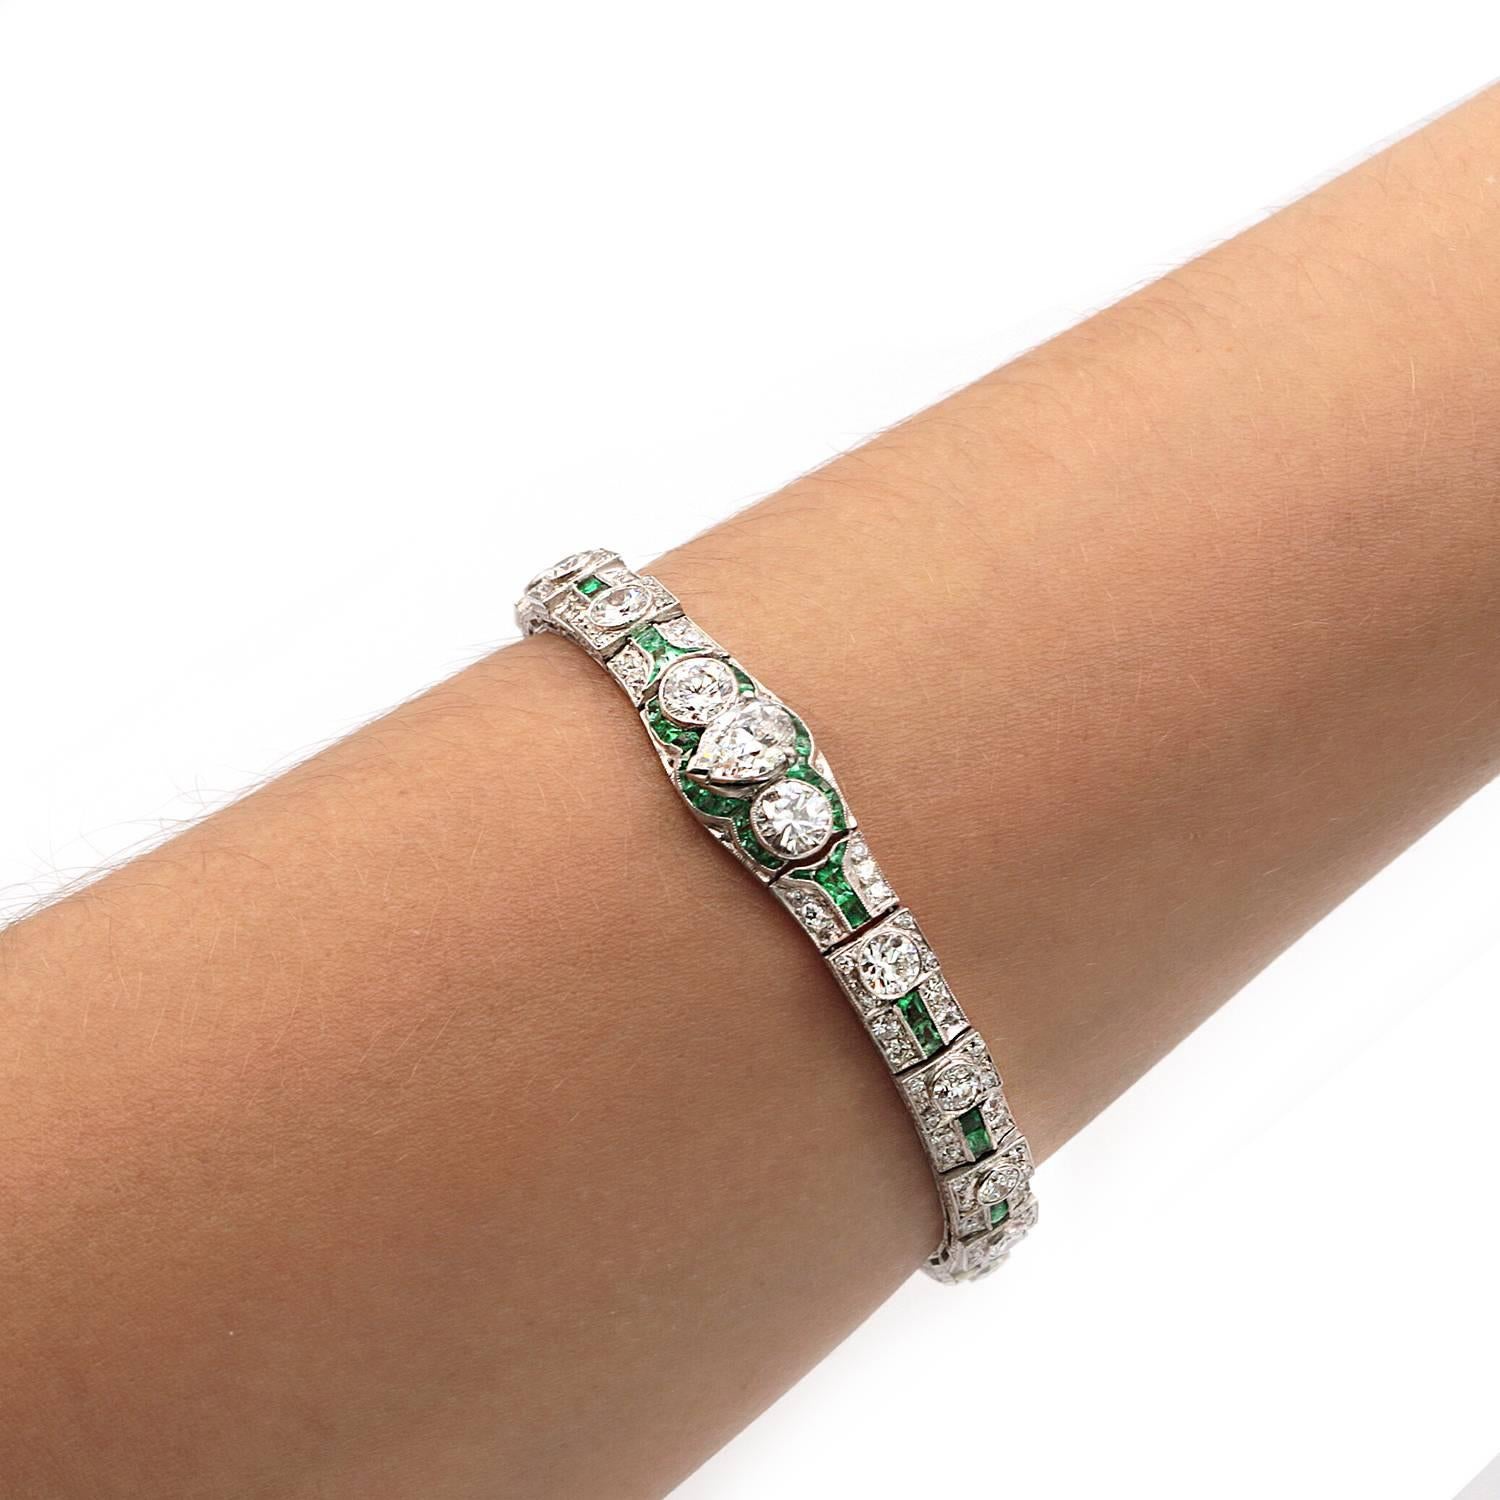  A fabulous art deco diamond and emerald bracelet . Center diamond a GIA pear shape F in color and VS 2 in clarity. The bracelet consist of approximately another 8 carats of old mine diamonds. 